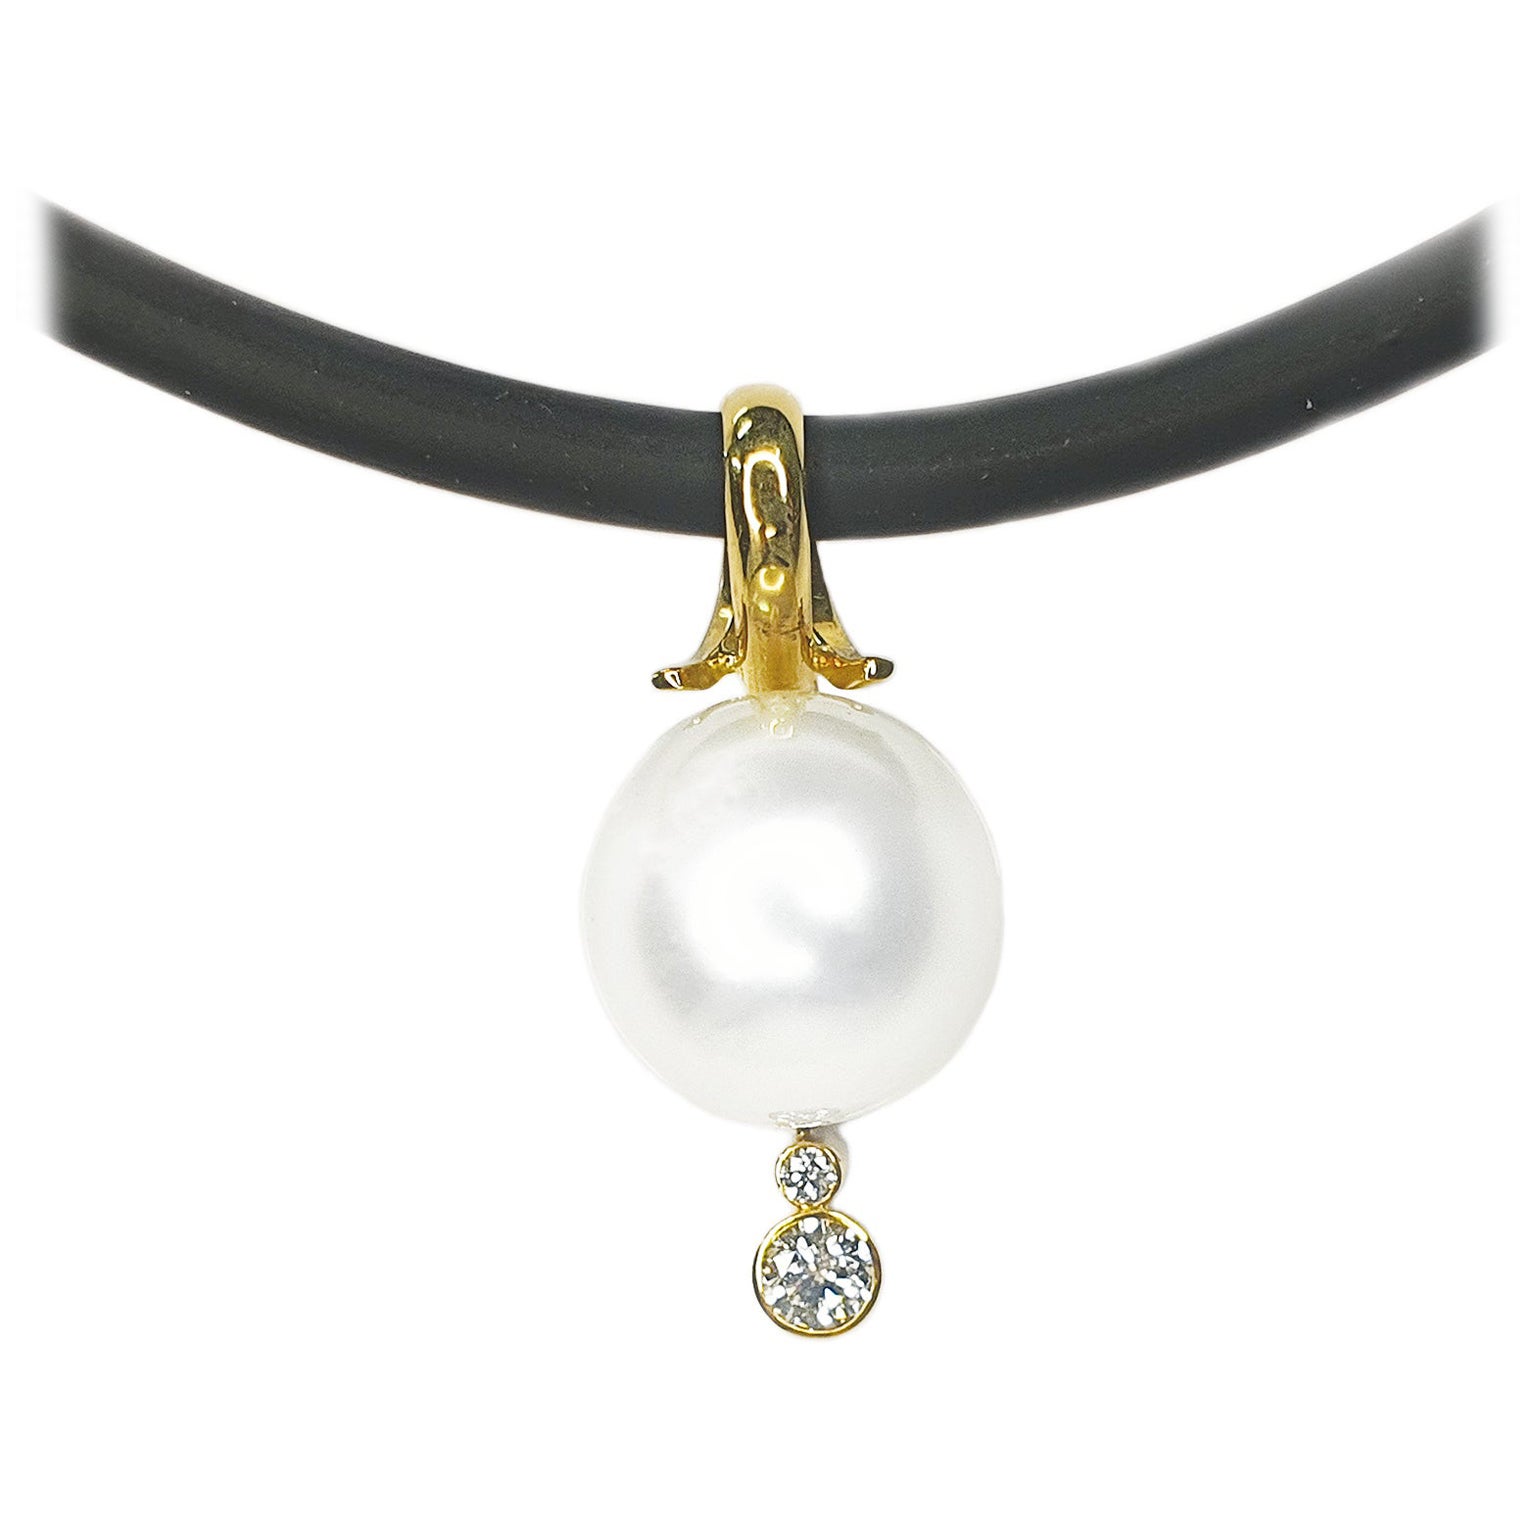 Paul Amey 18K Gold and South Sea Pearl Pendant on Neoprene Choker For Sale